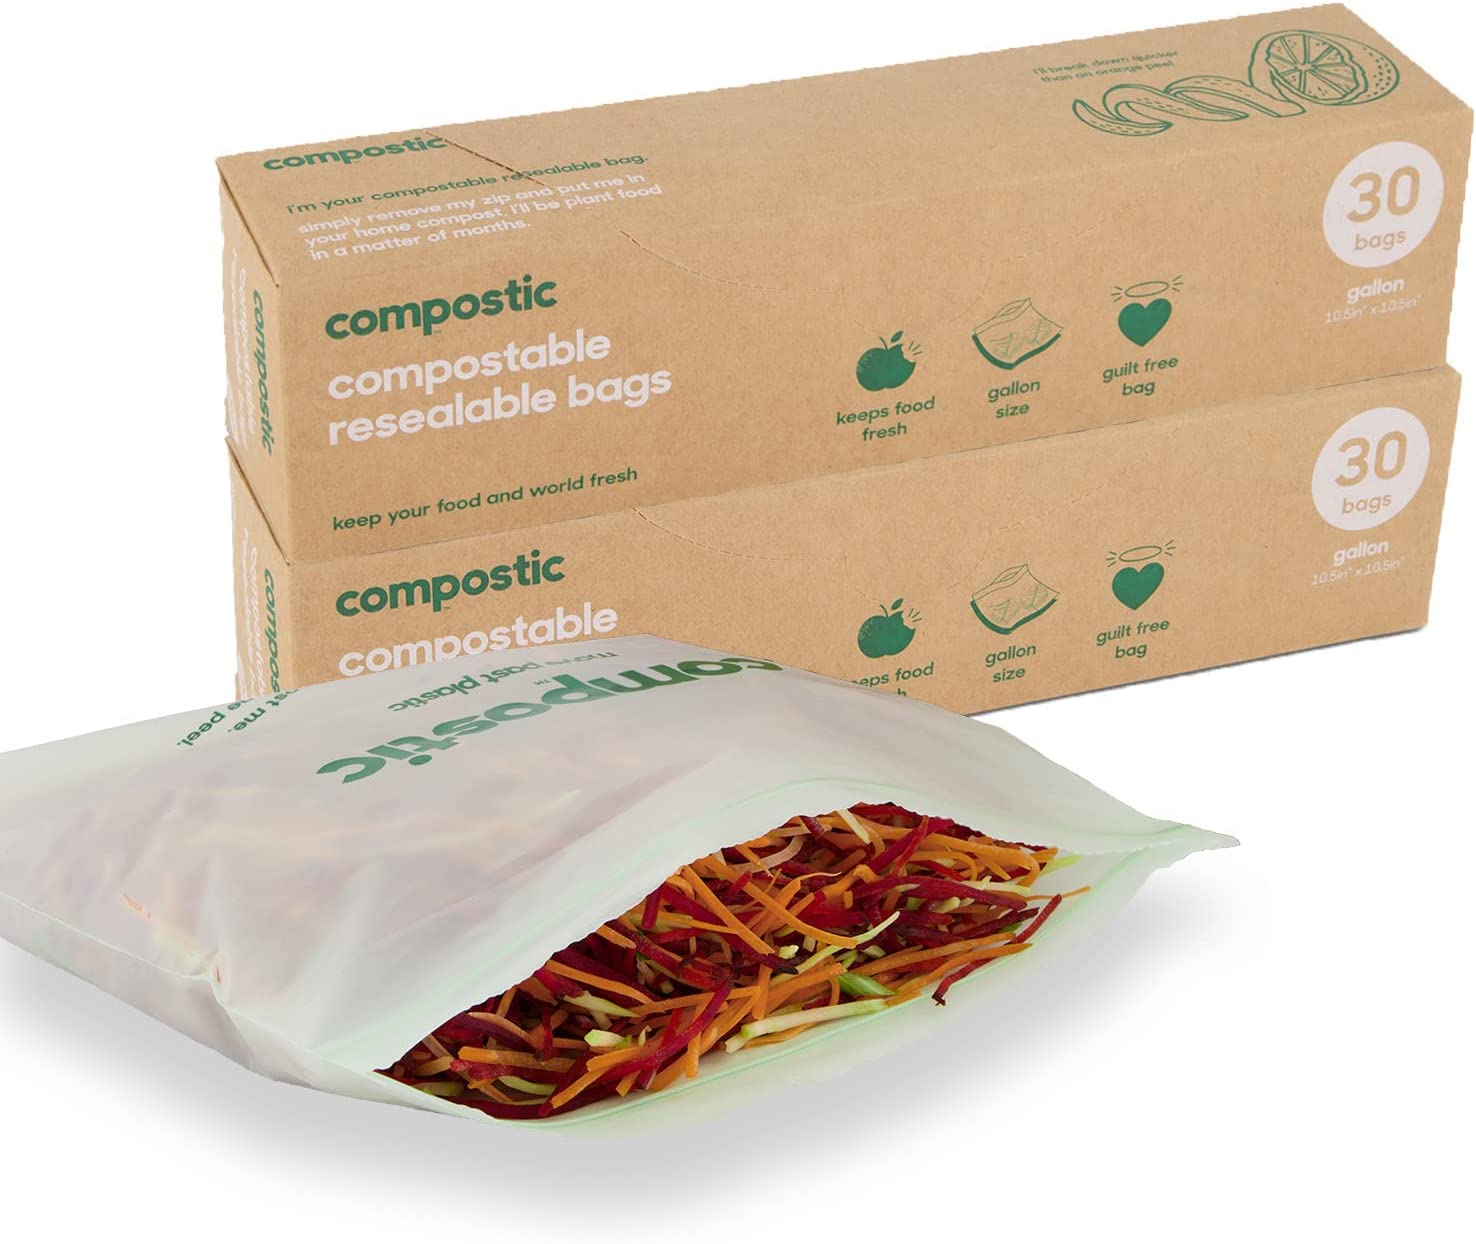 Compostic Home Compostable Resealable Gallon Bags